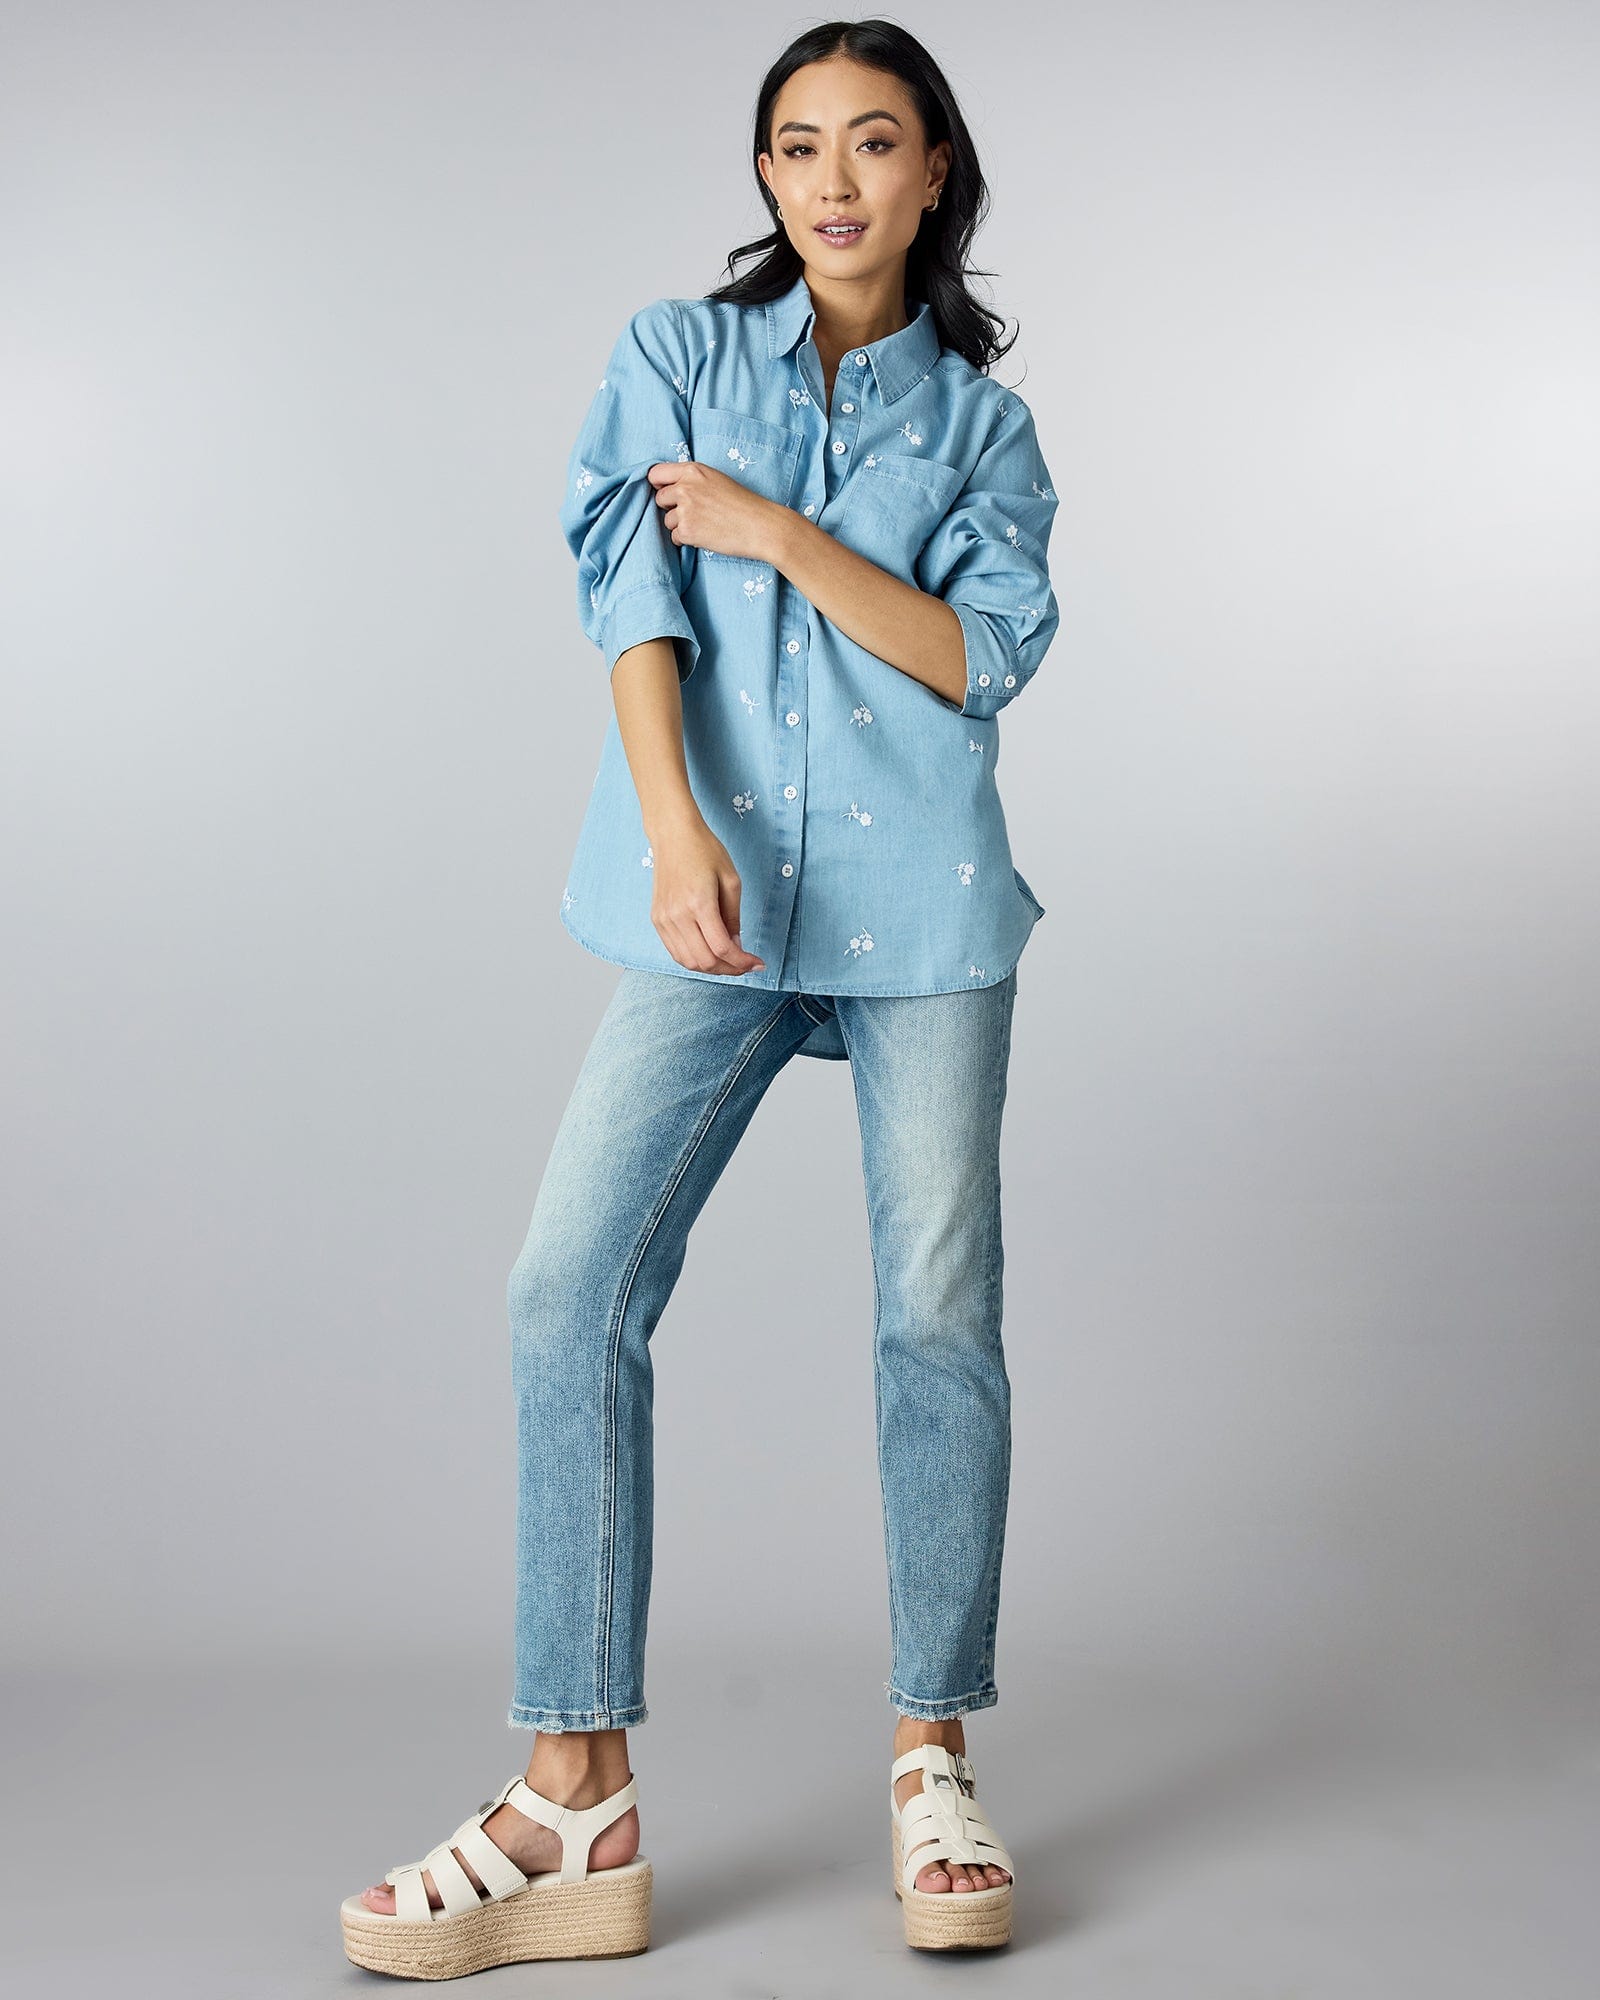 Woman in a long sleeve, chambray button-down top with floral embroidery.